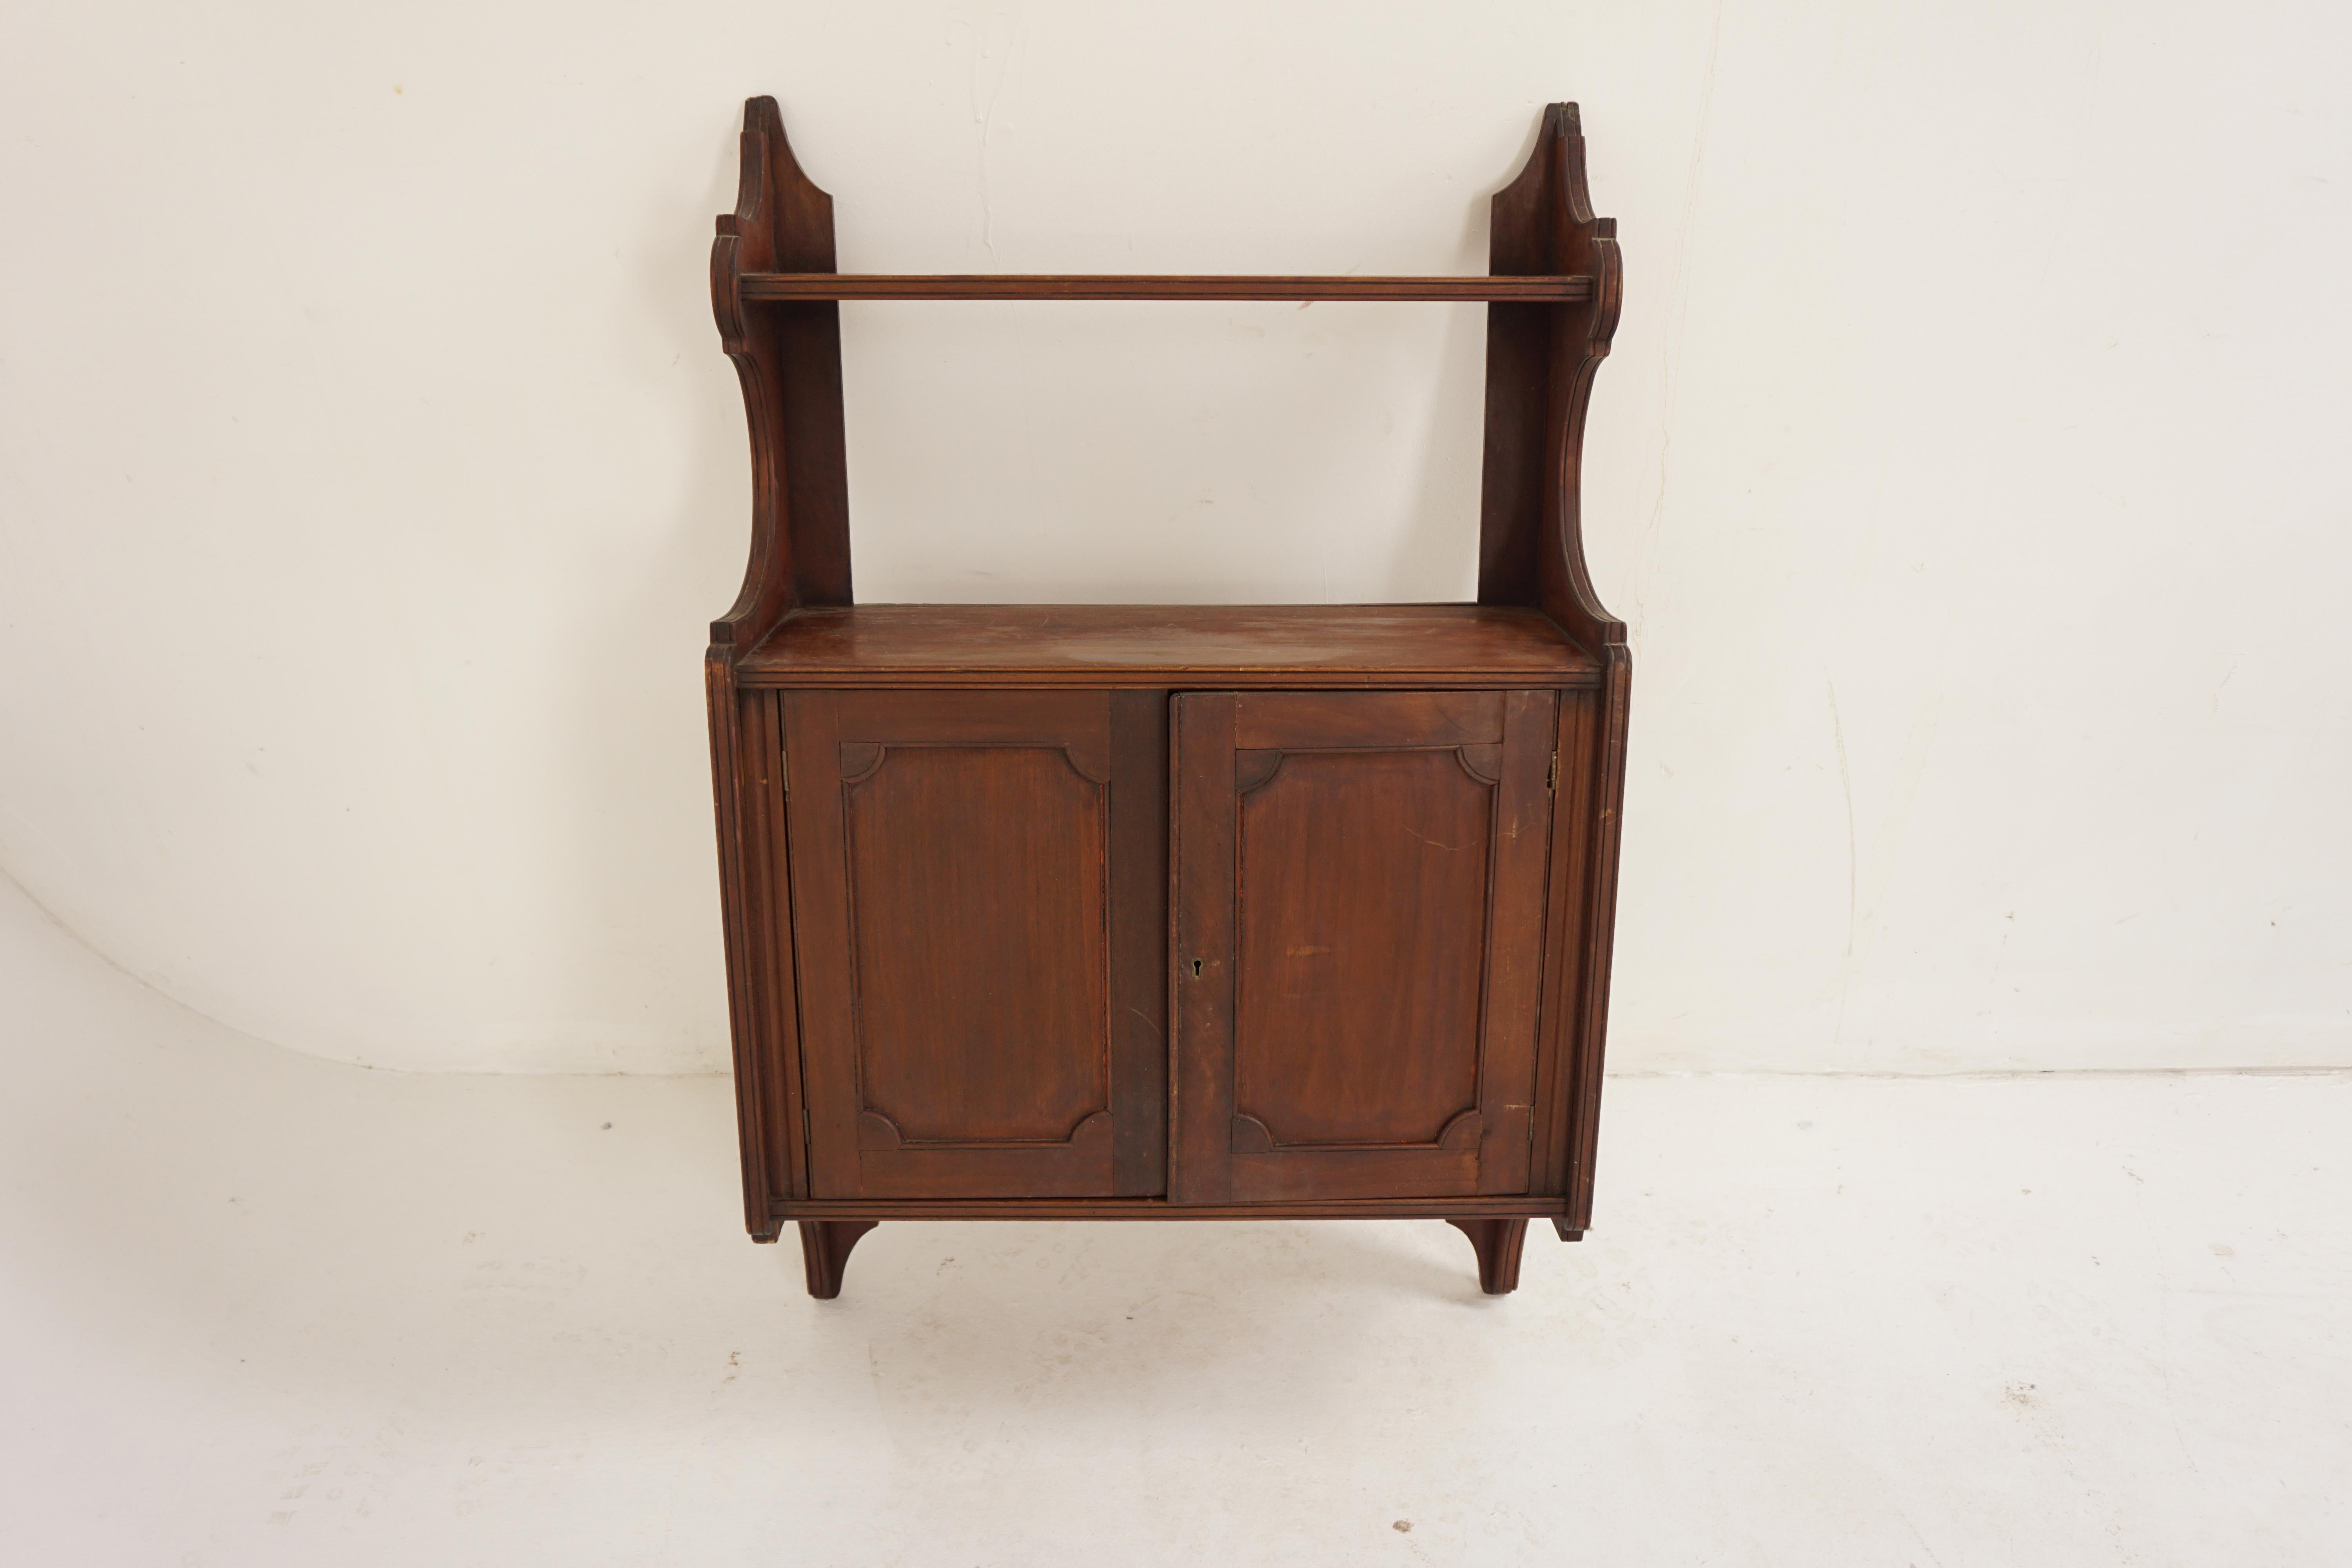 Victorian walnut wall mounted hanging display cabinet, Scotland 1890, H084

Scotland 1890
Solid walnut
Original finish
Having two door cupboard base
Below a two tier top section
With shaped sides
Good condition
All joints are tight

H084
Measures: